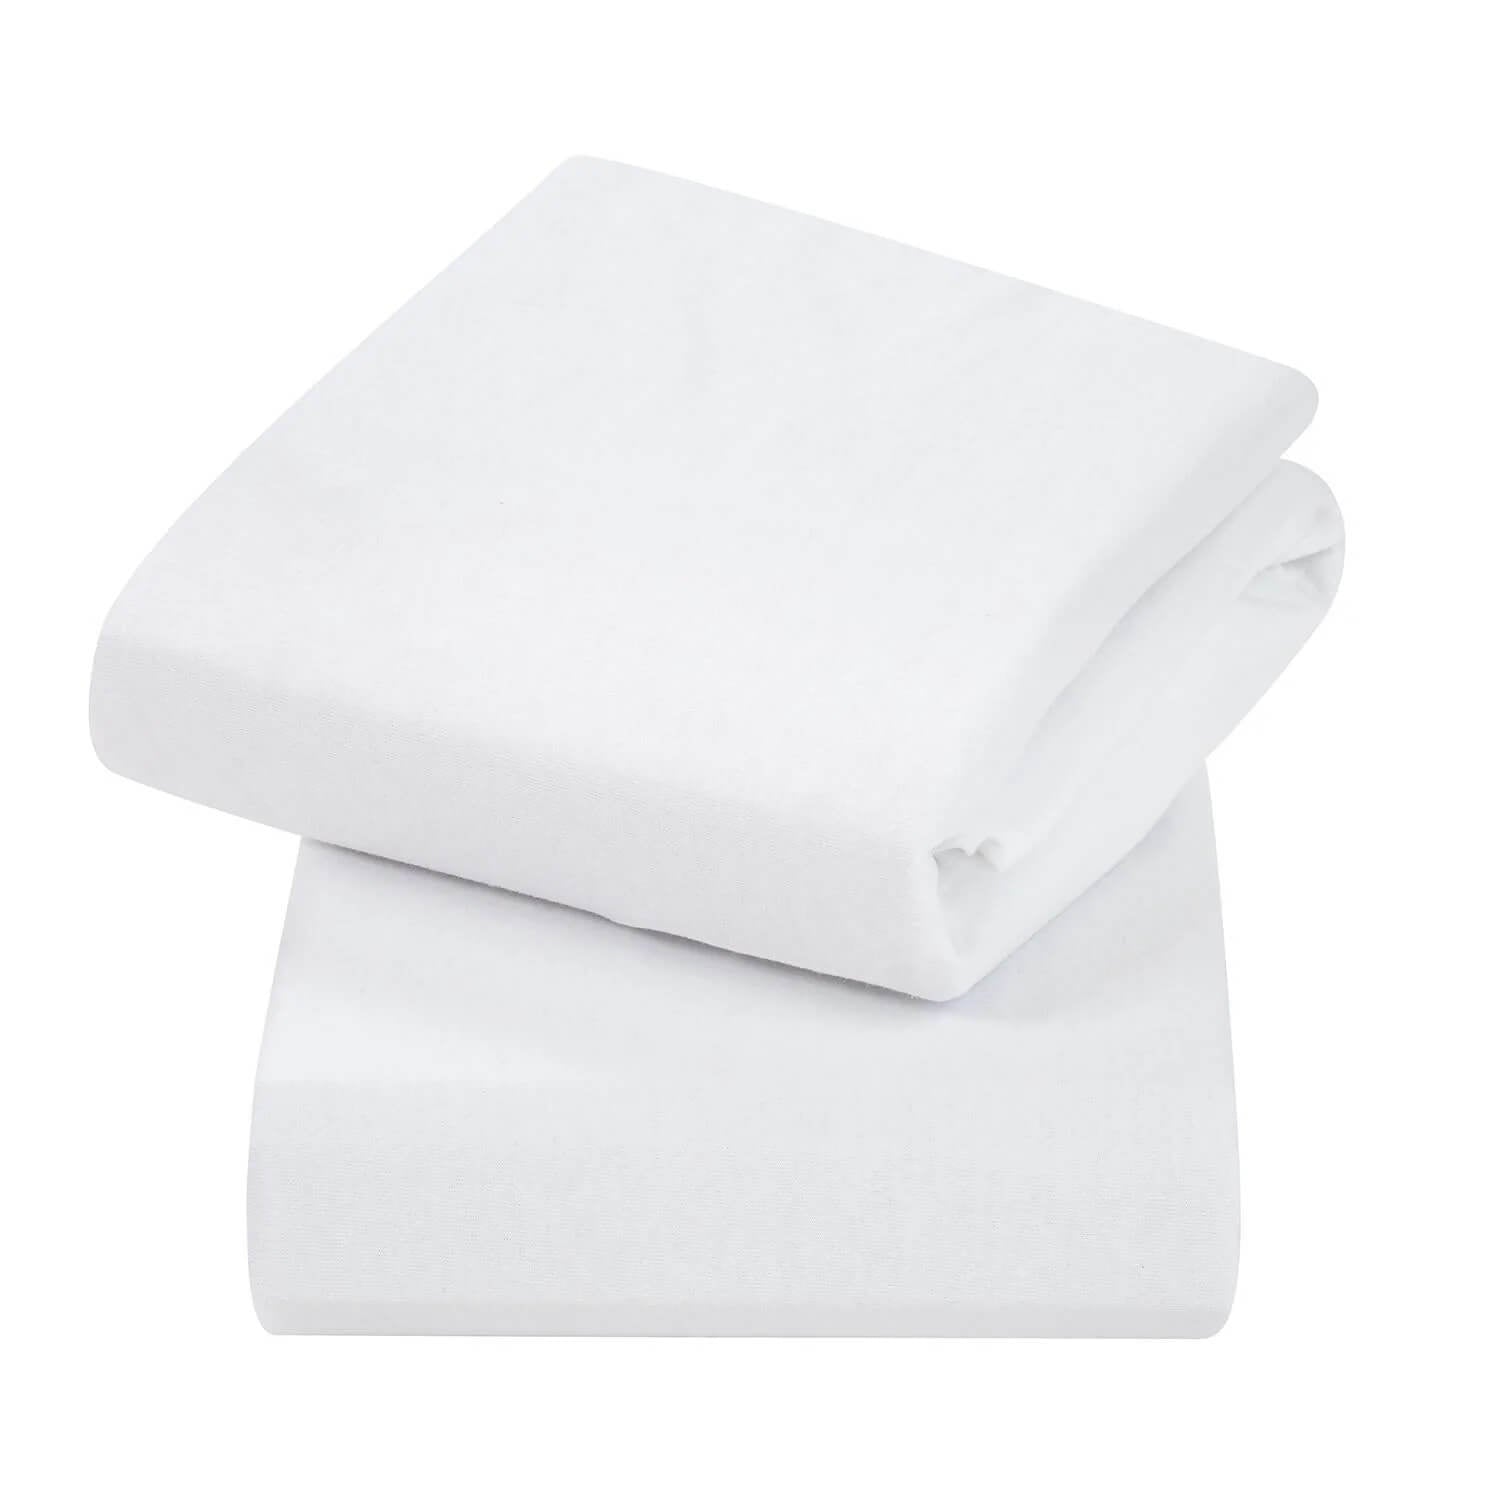 Super soft 100% jersey cotton sheets. Deep Elastic skirts: with 360 elastic flap for secure fitting. 2 pack of fitted sheets for cotbed in white.